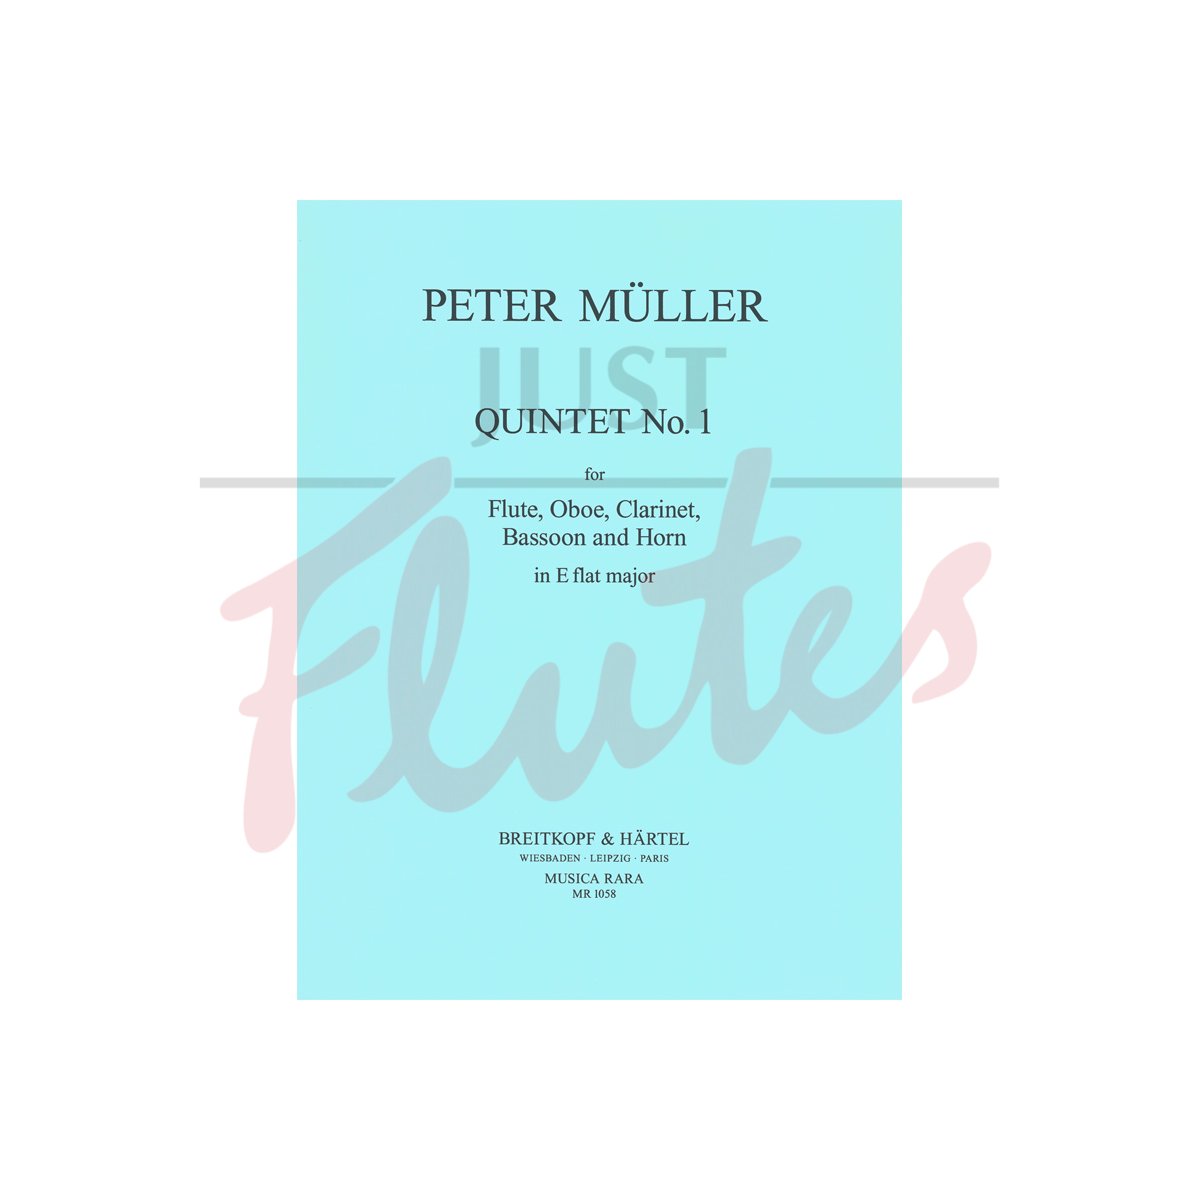 Quintet No 1 in E flat major for Flute, Oboe, Clarinet, Bassoon and Horn